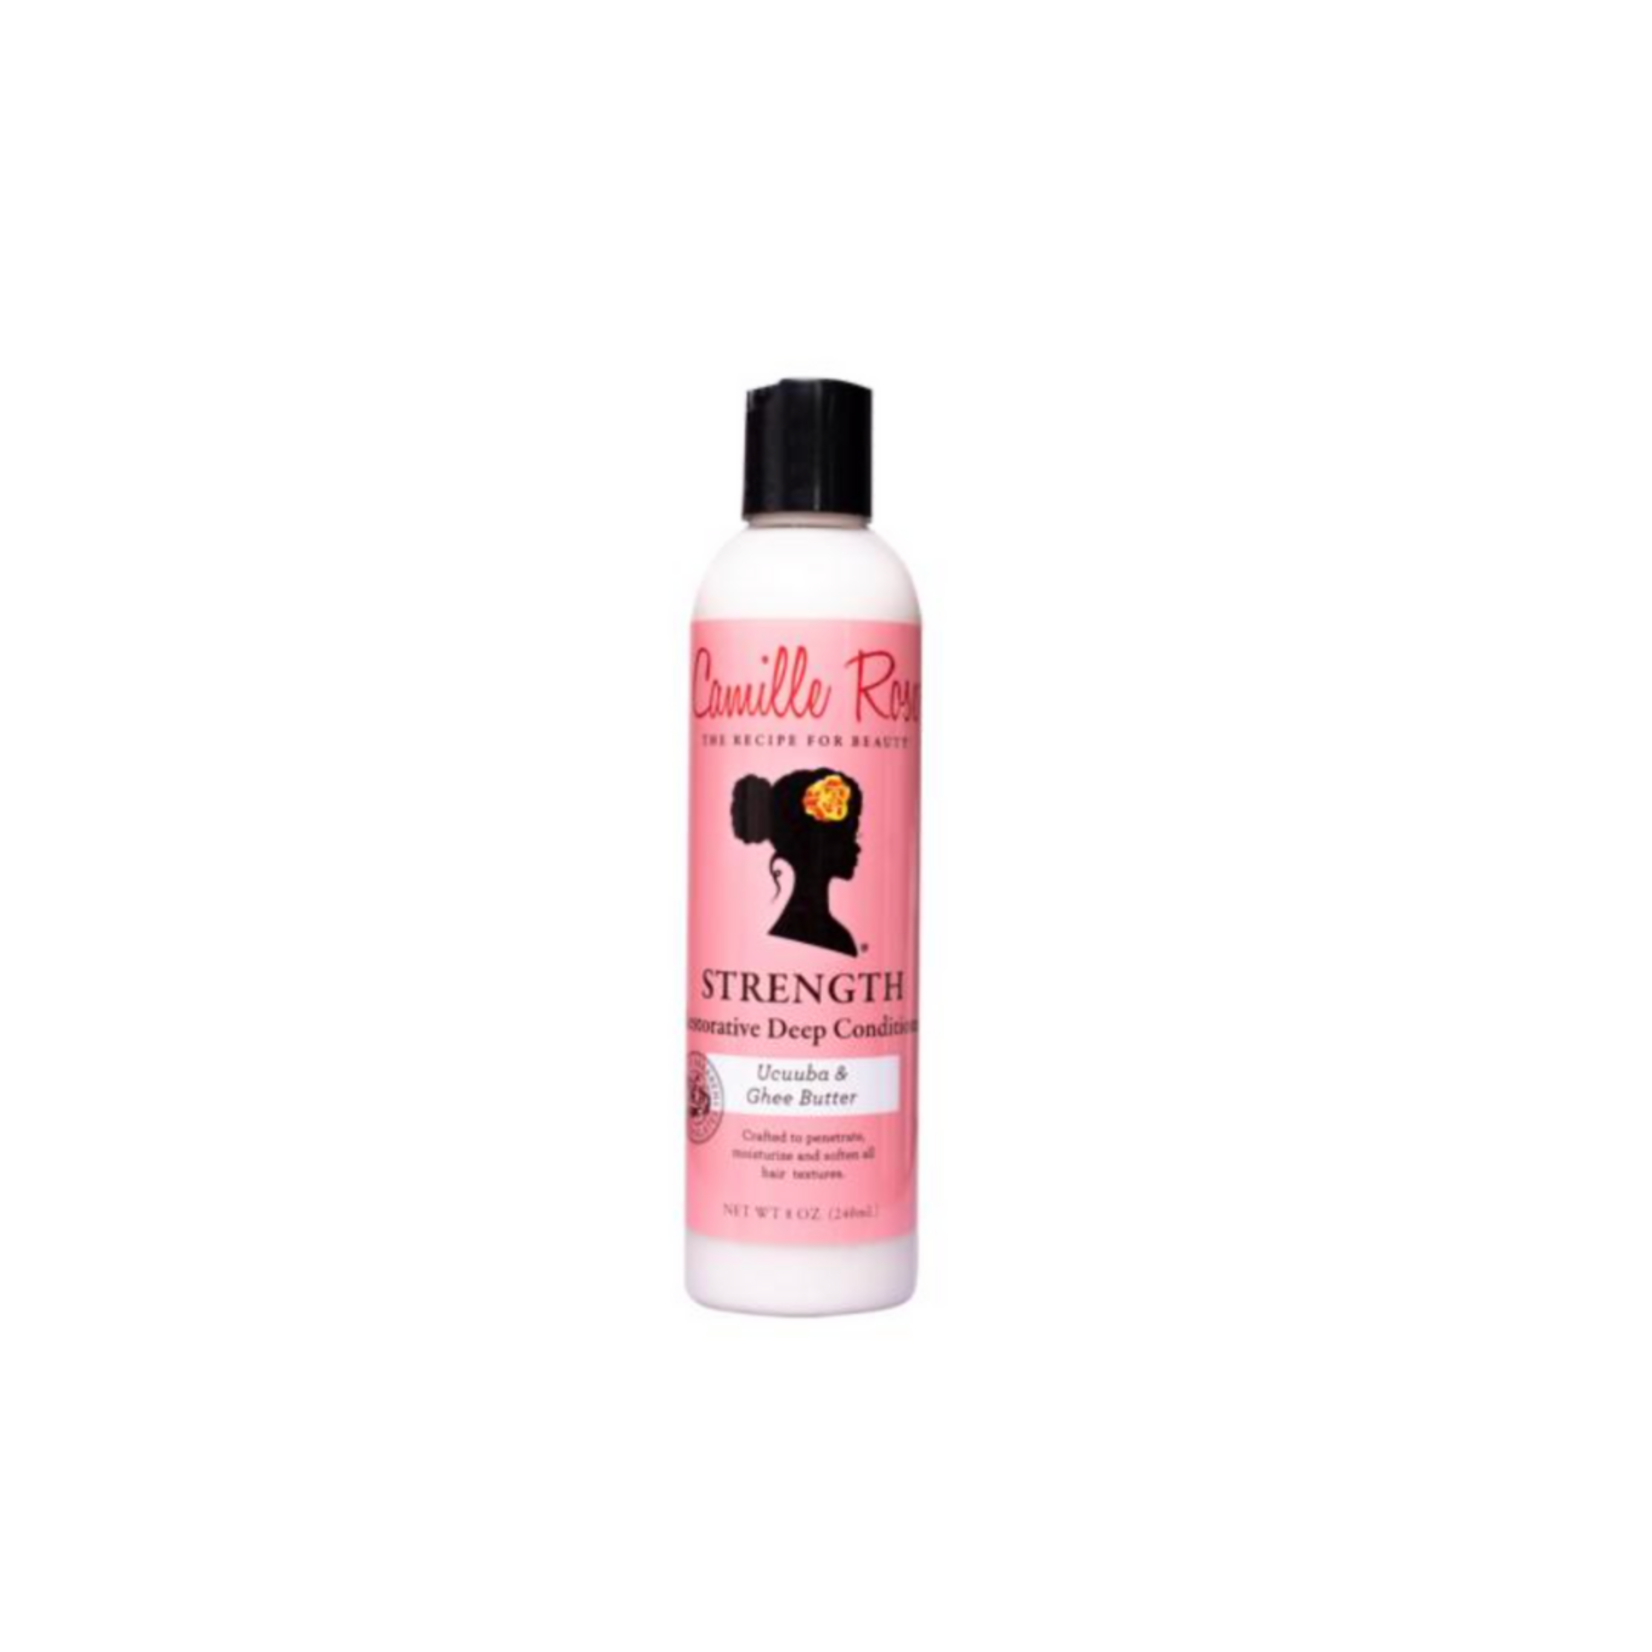 Camille Rose Camille Rose Strength Restorative Deep Conditioning